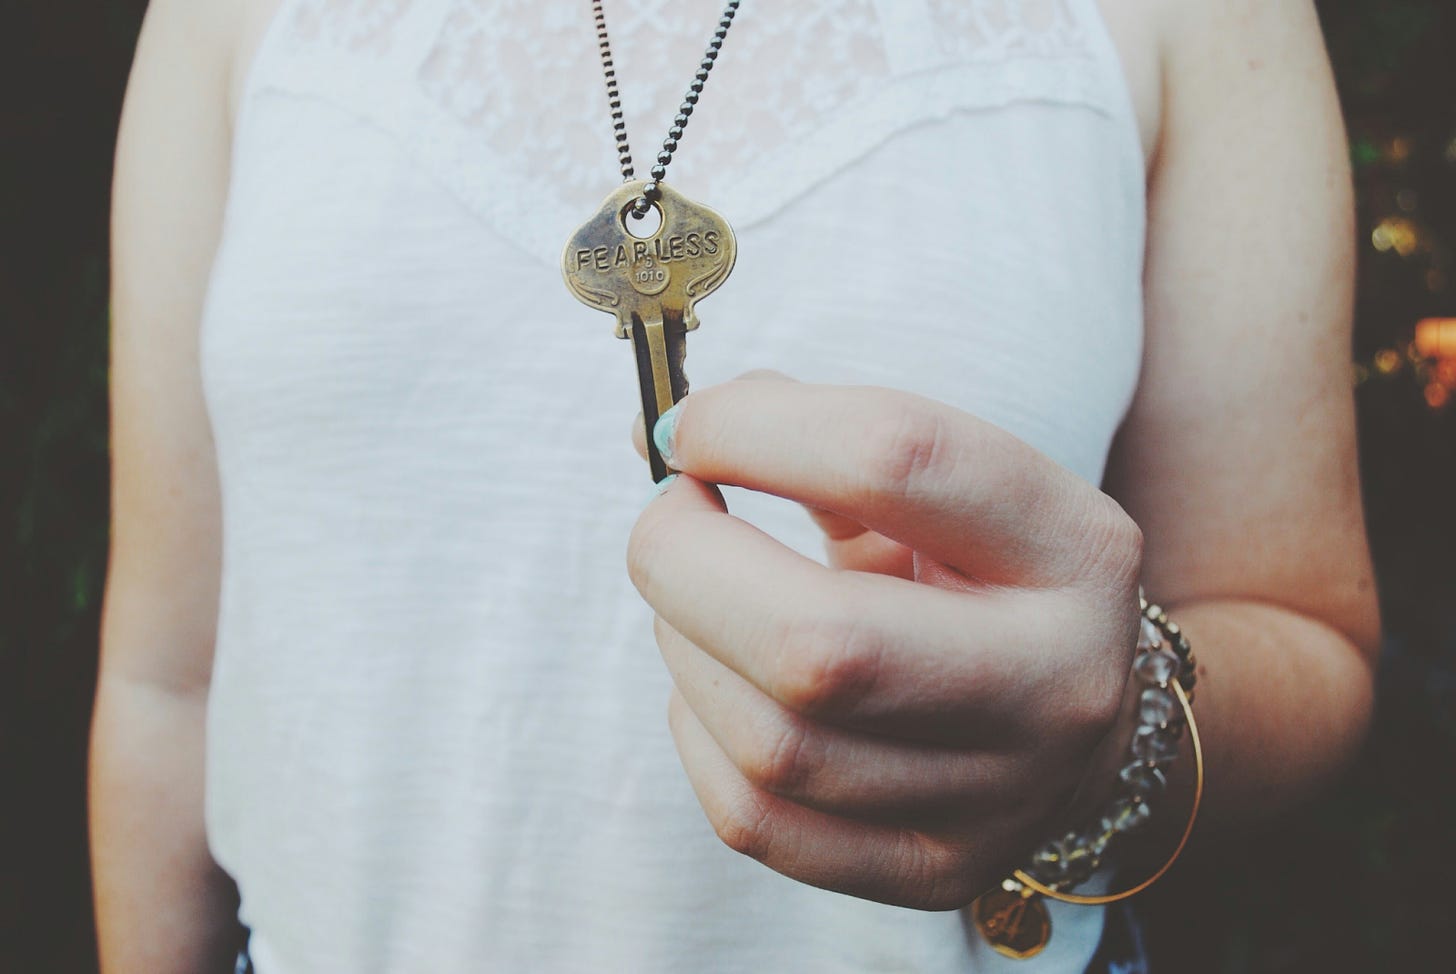 woman in a white sleeveless shirt with a key saying FEARLESS on a chain around her neck